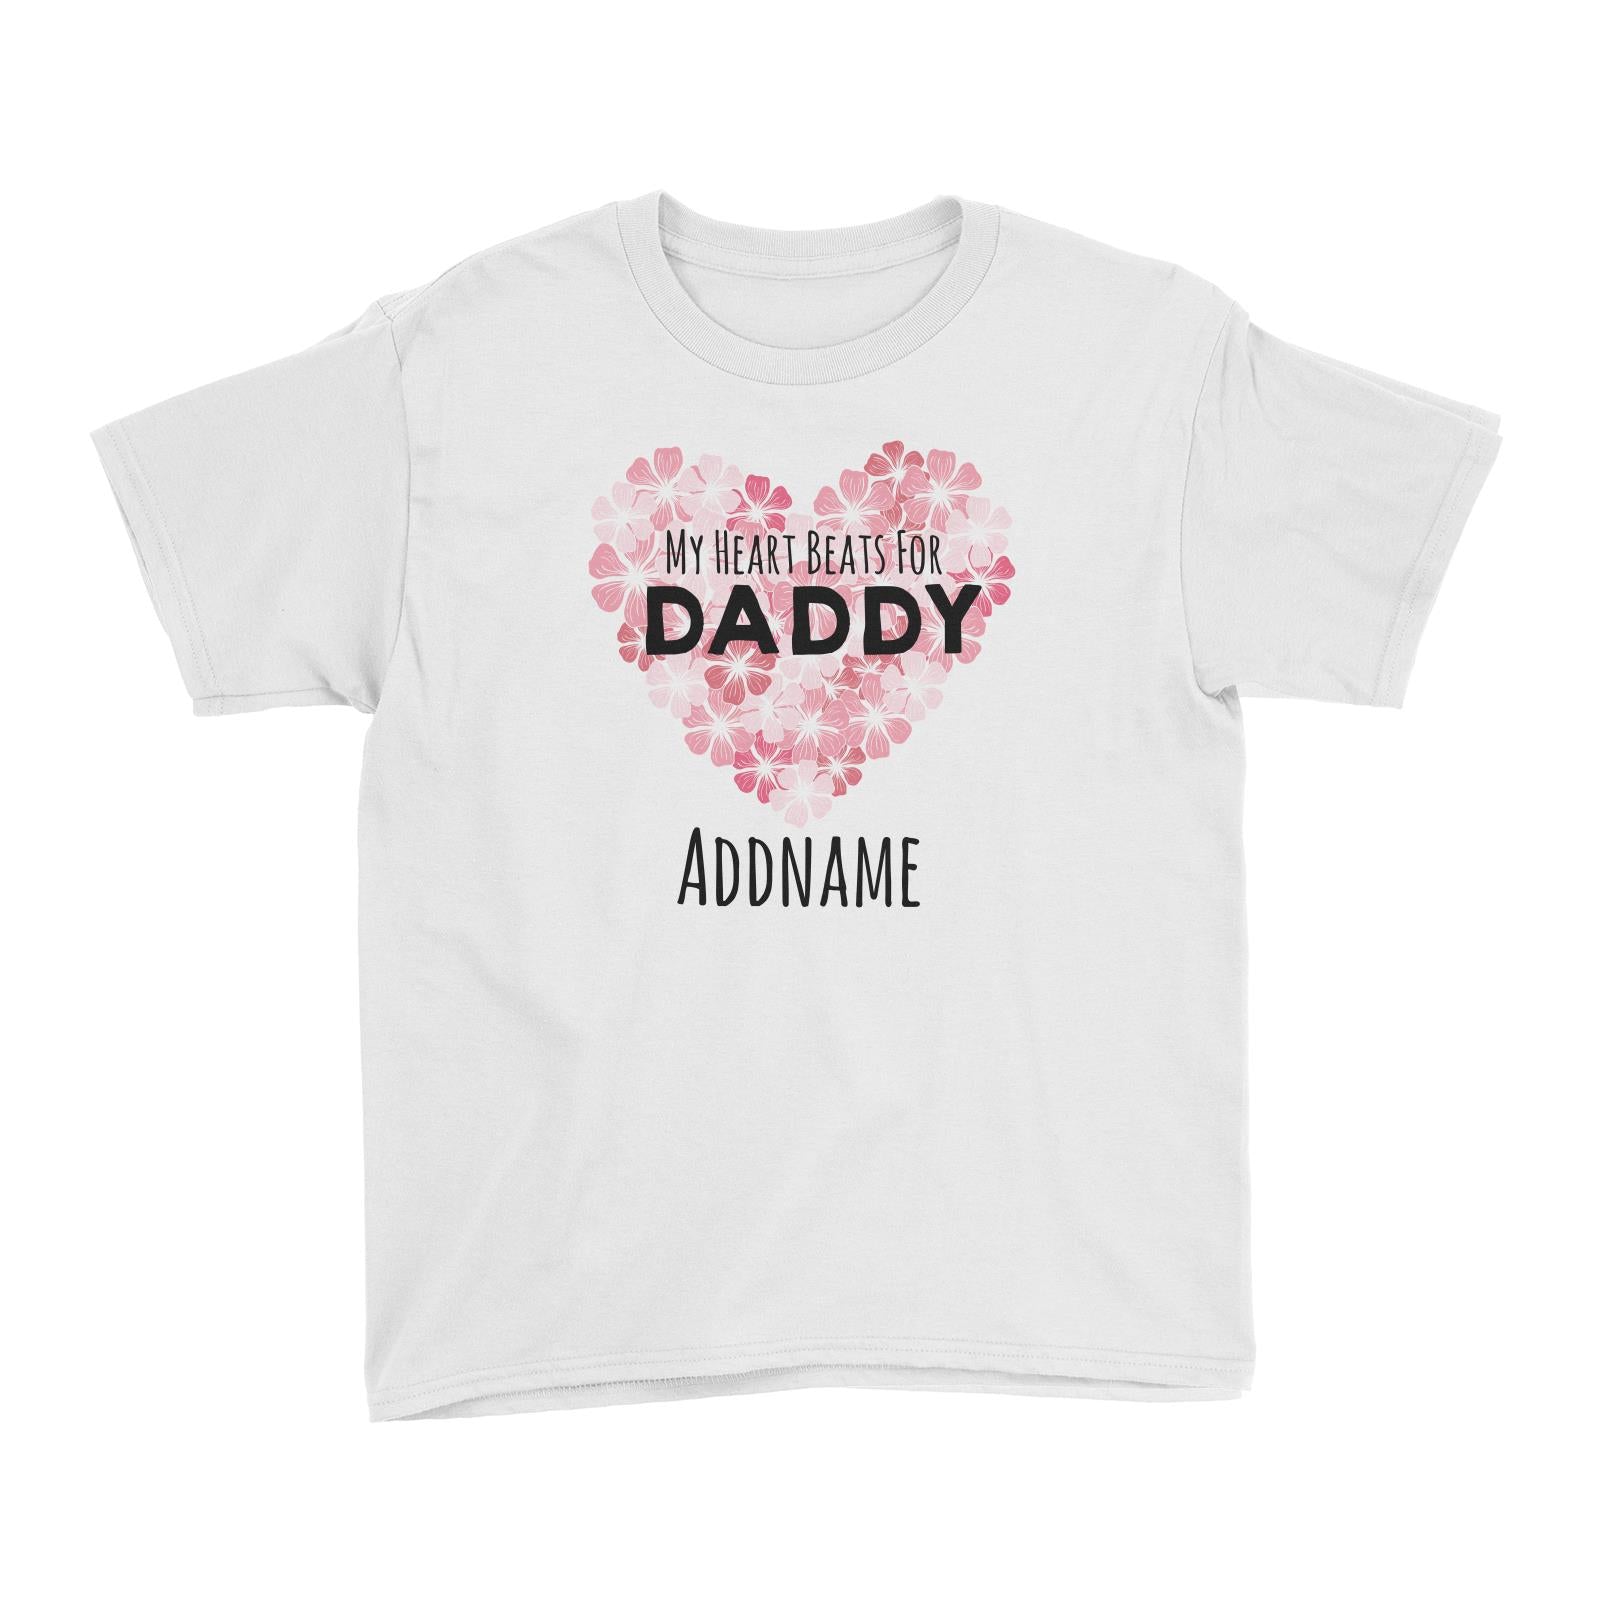 Drawn Mom & Dad Love Heart Beats for Daddy Addname Kid's T-Shirt